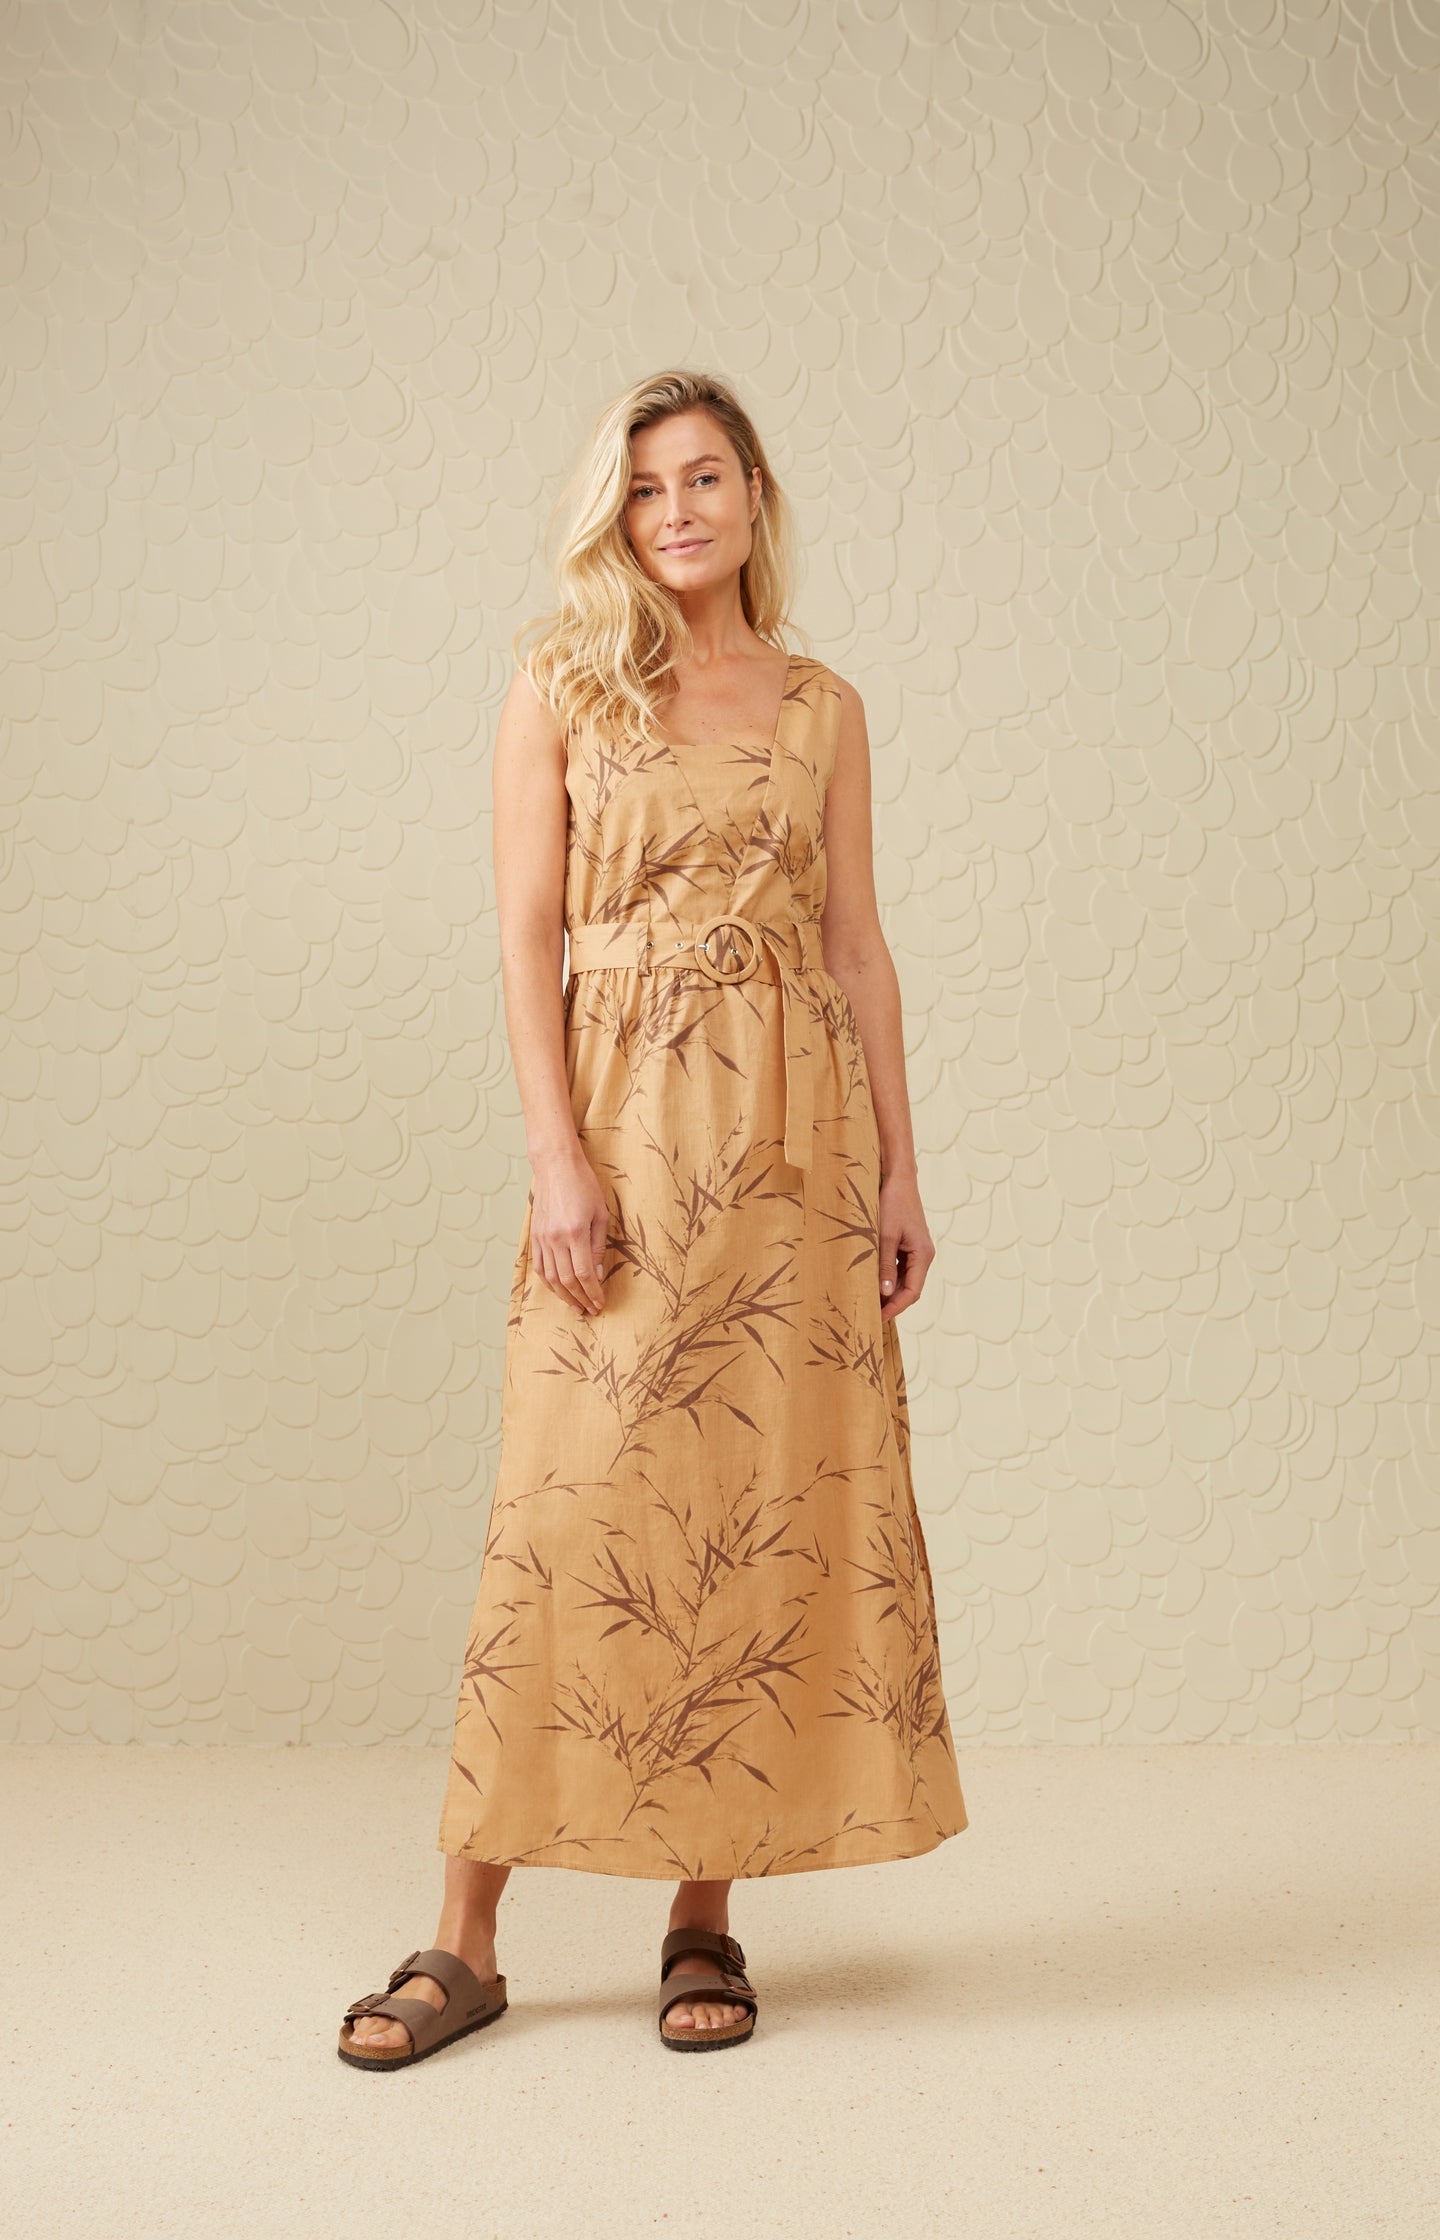 Woven maxi dress with square neck, slits and bamboo print